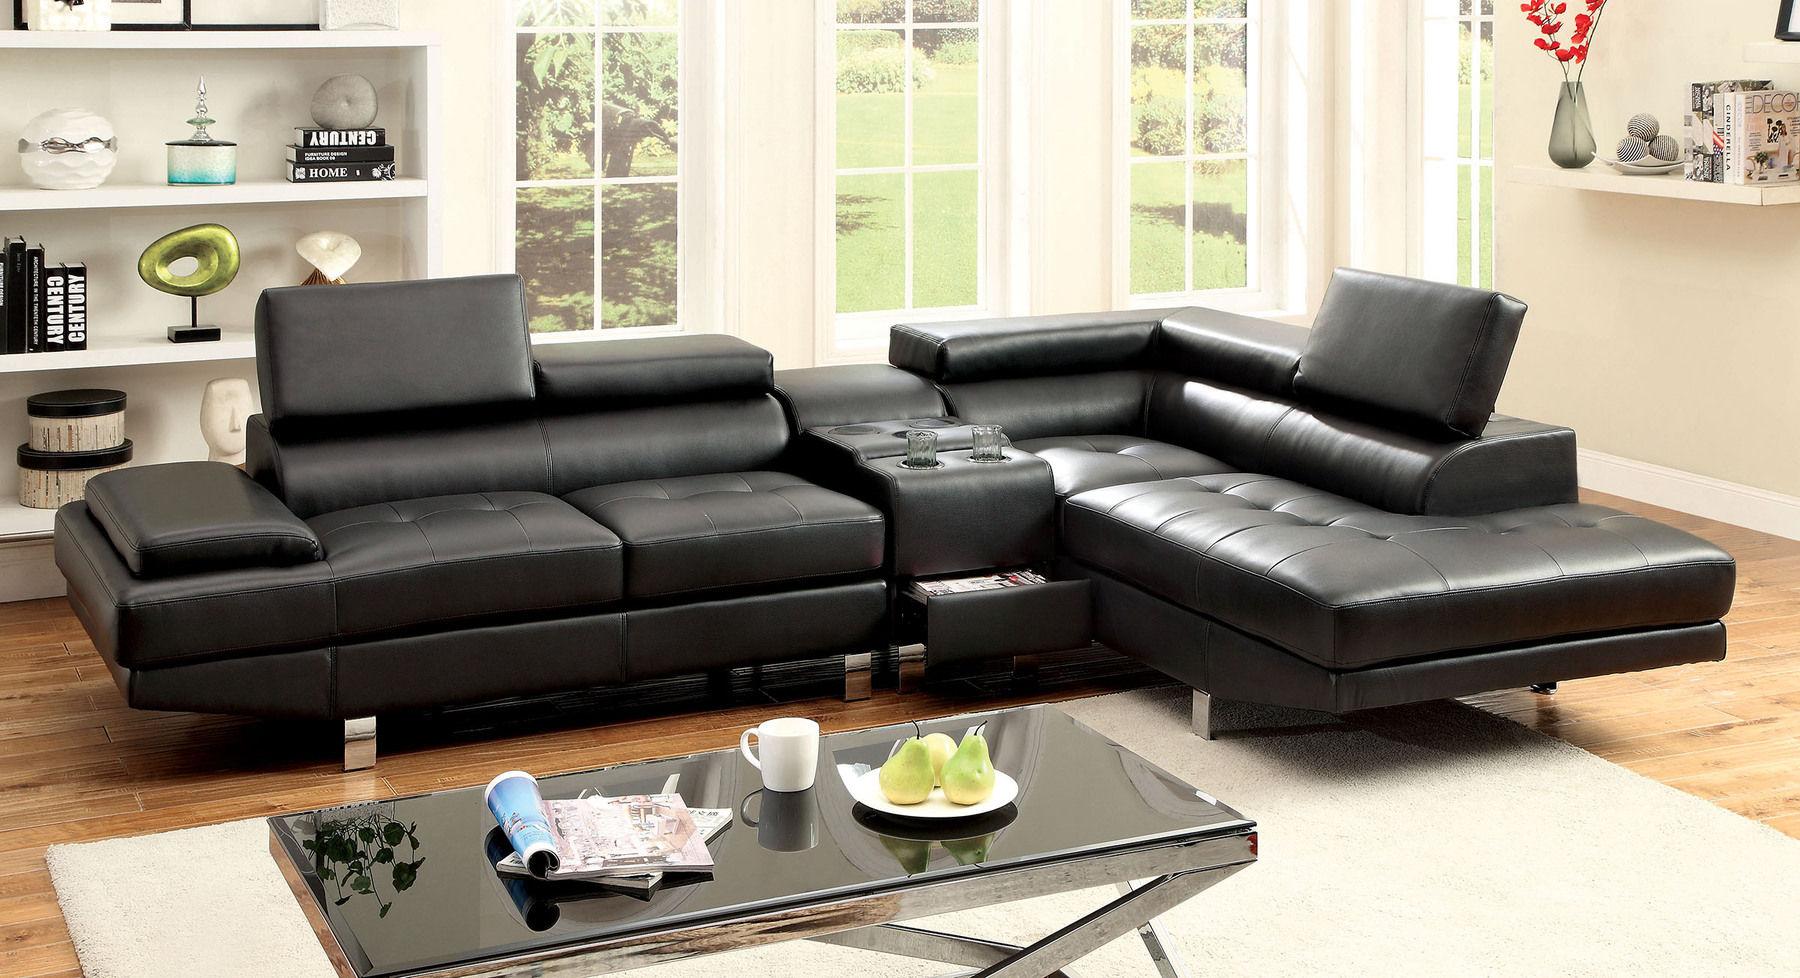 Contemporary Sectional Sofa and Console CM6833BK-2PC Kemina CM6833BK-2PC in Black Bonded Leather